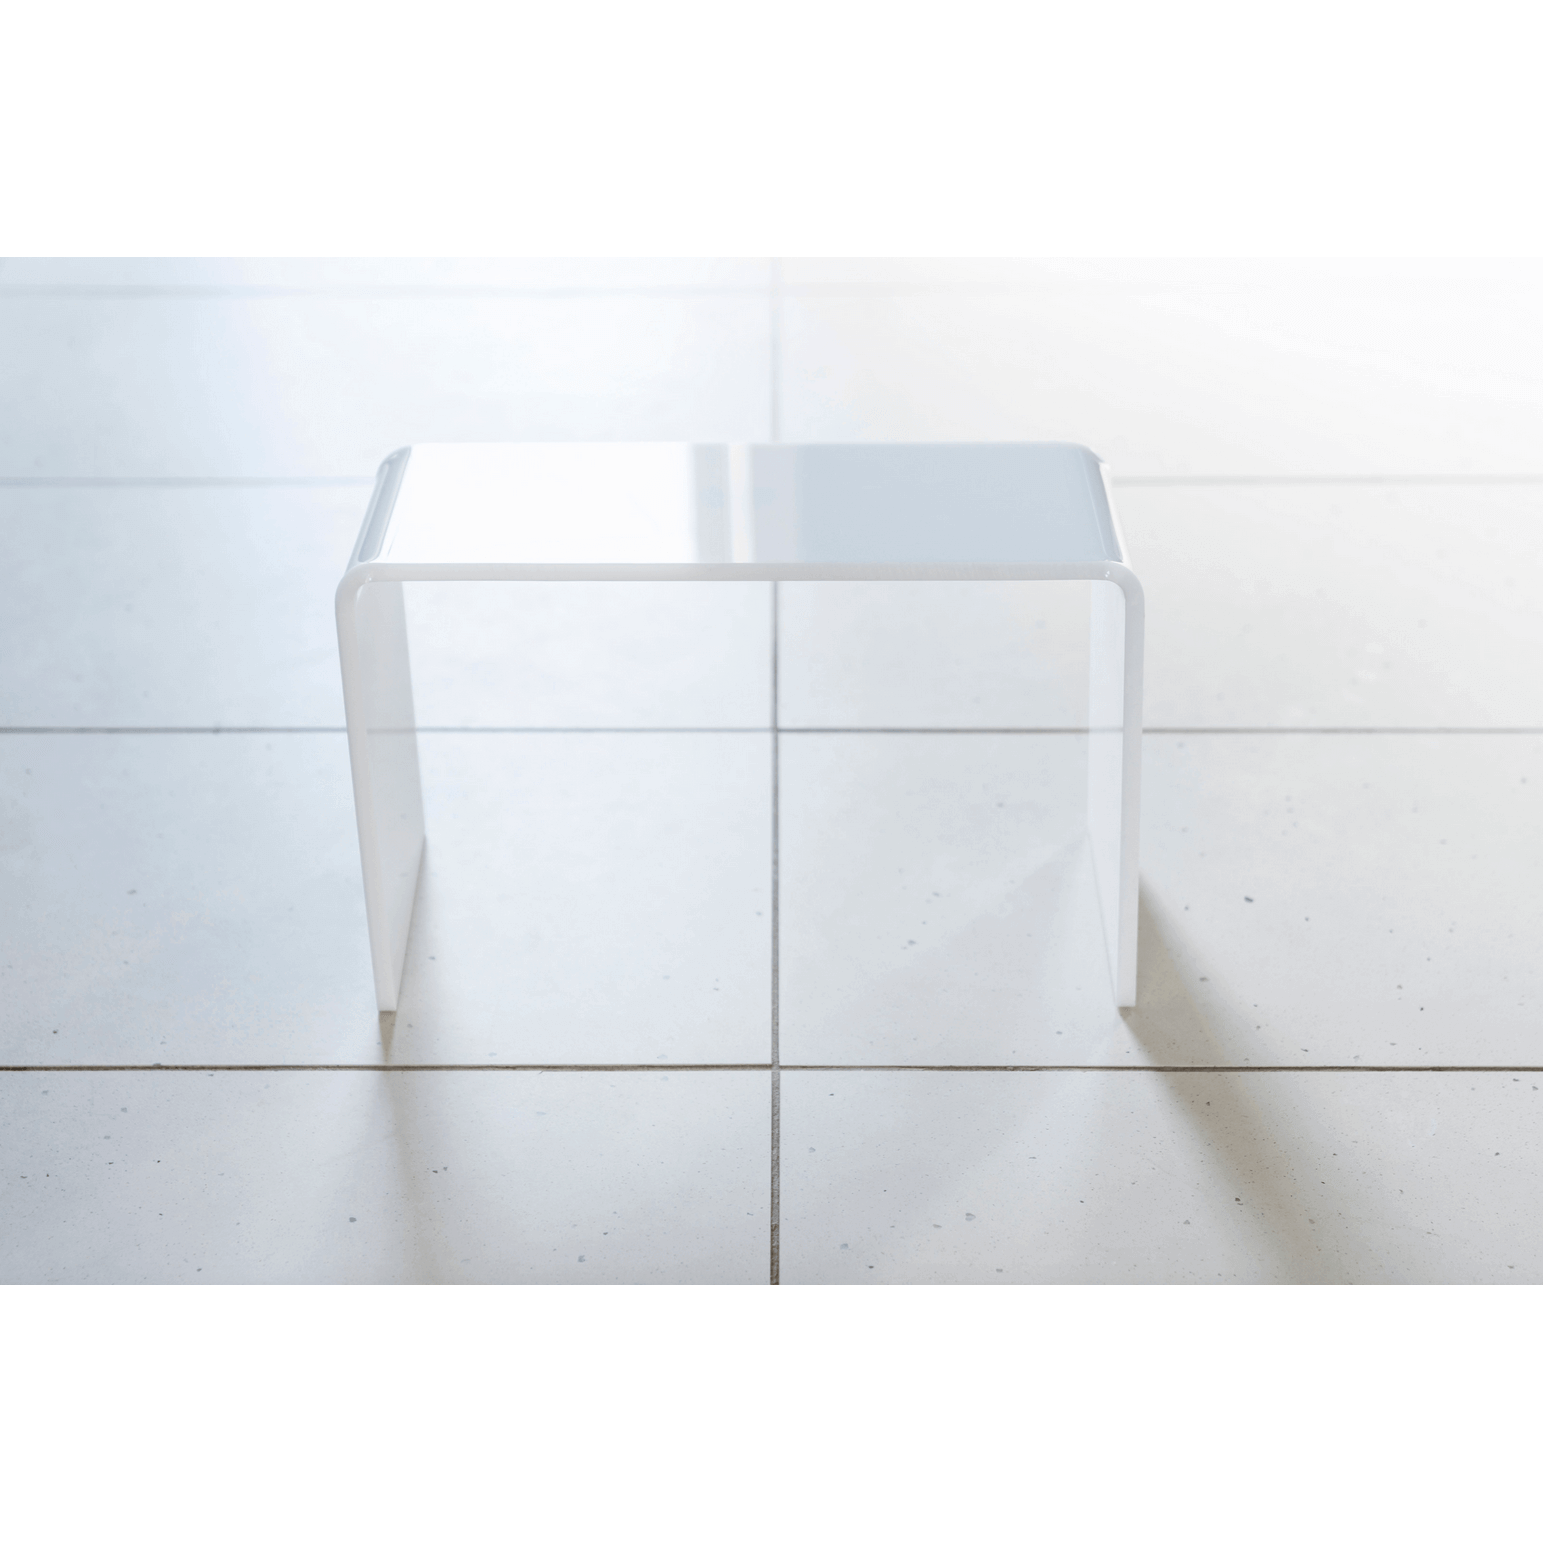 The PROPPR Acer - White Toilet Foot Stool - front view in a bathroom